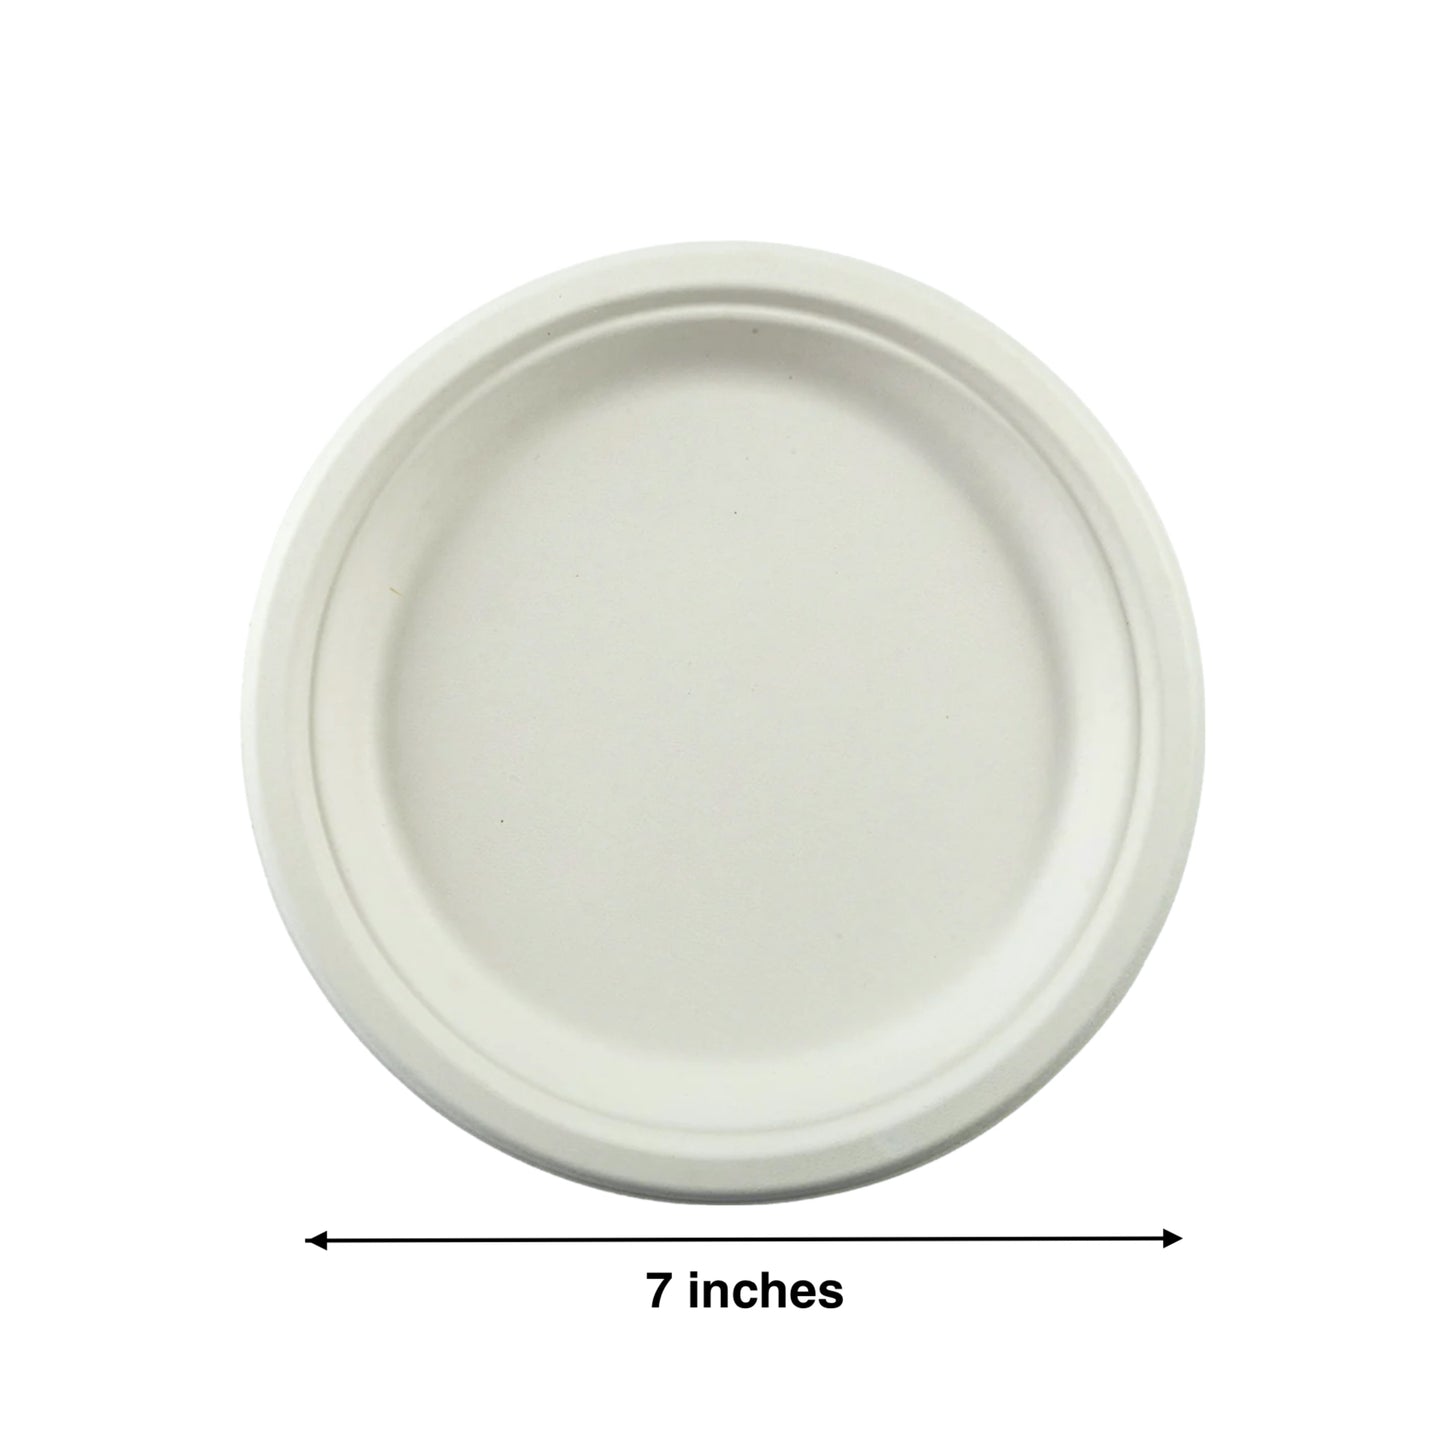 KIS-S7G | 7 inches Round Plate, 1-Compartment,Sugarcane Food Container; $0.053/pc